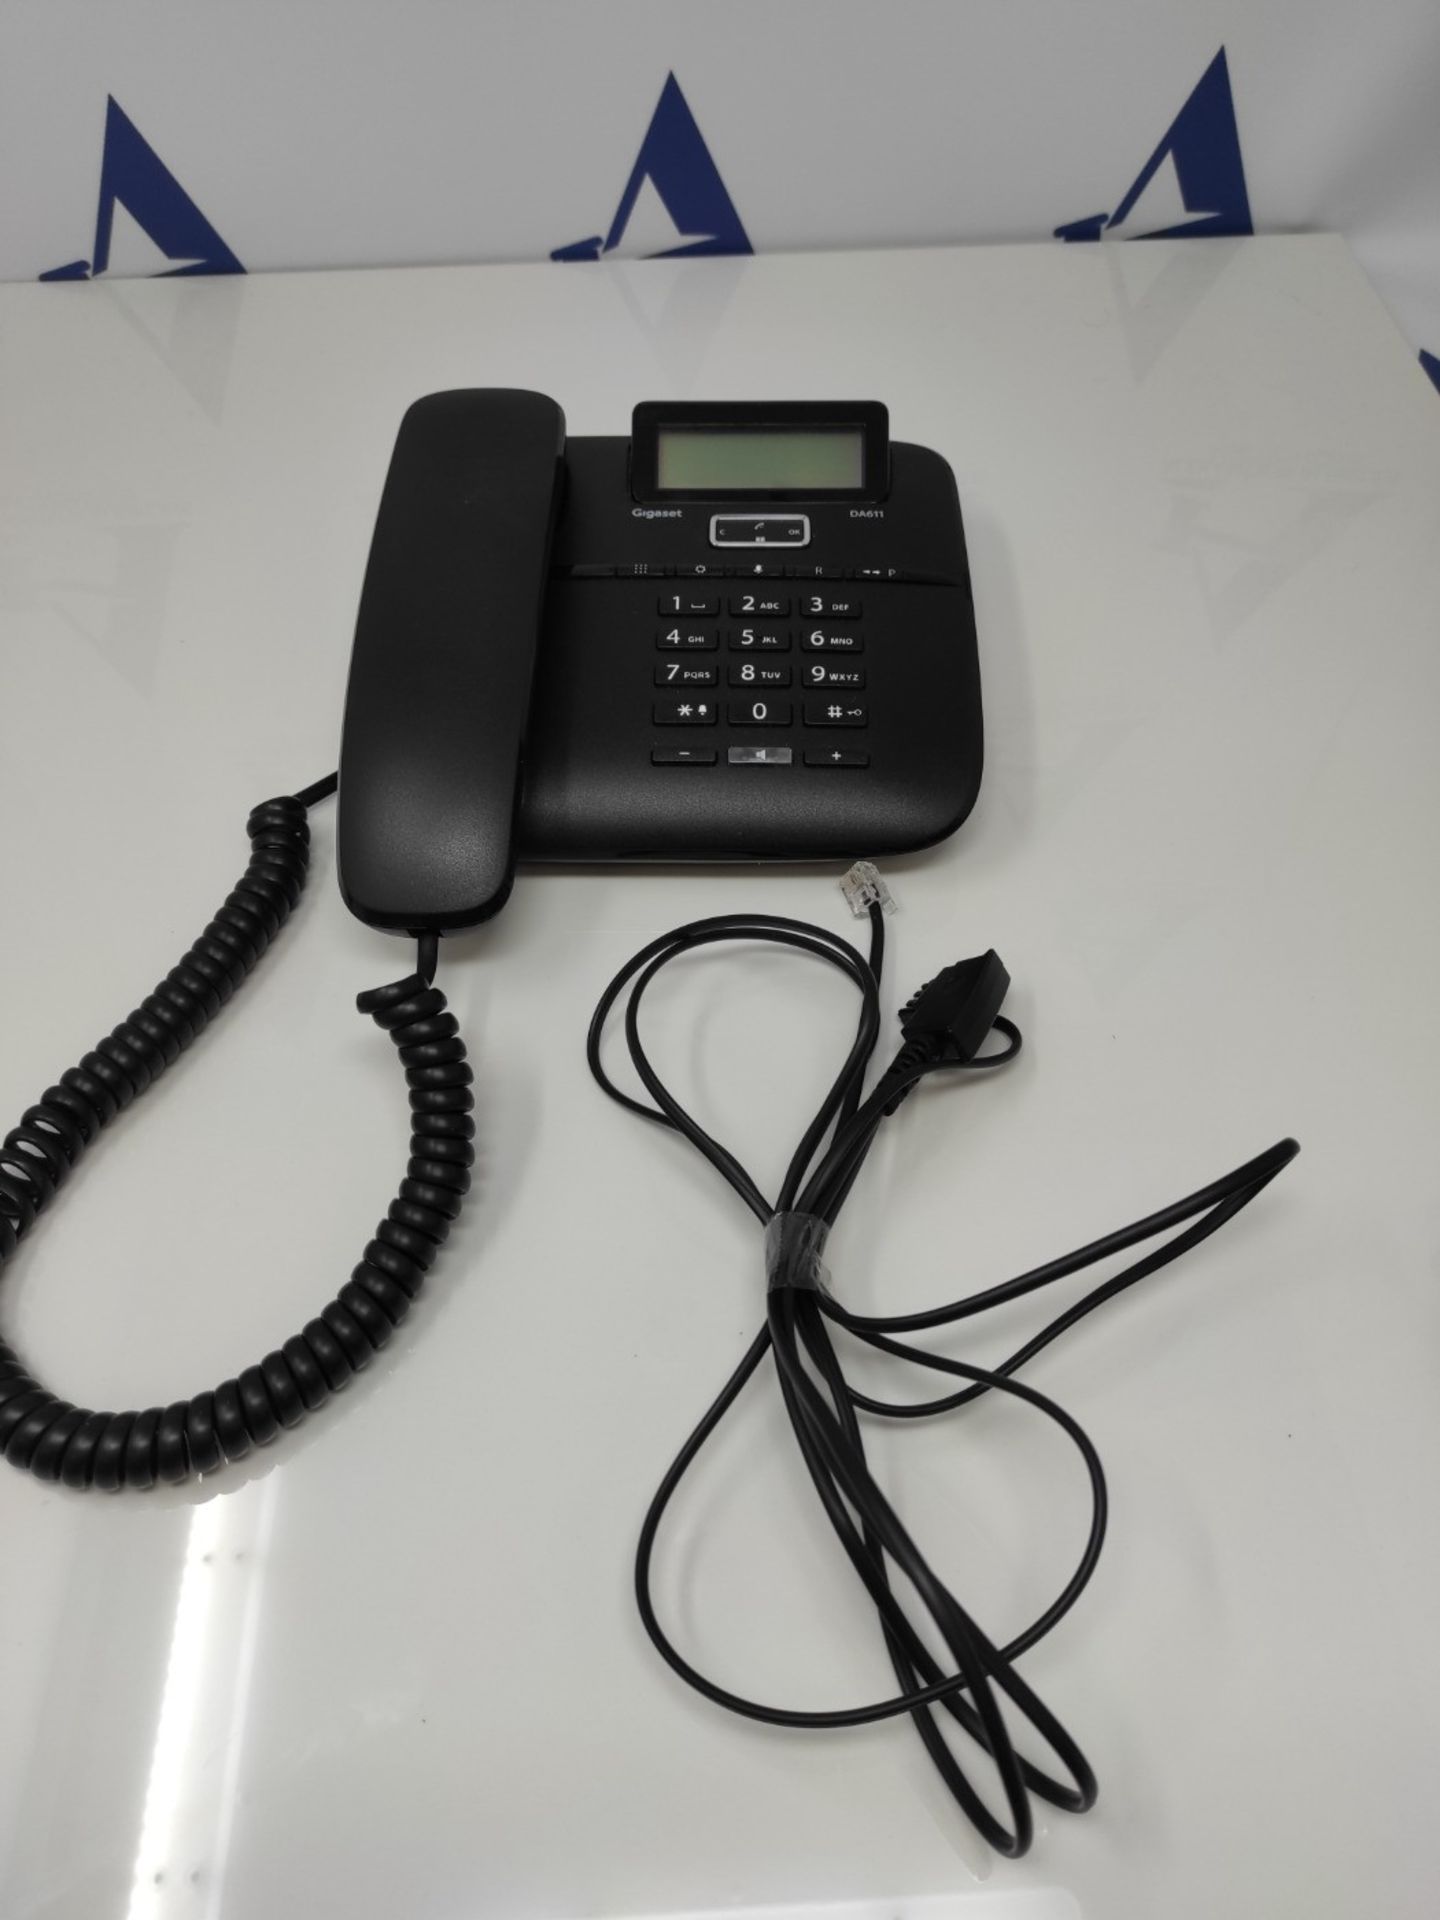 Gigaset DA611 - Corded telephone with hands-free function - Phone book with VIP markin - Image 3 of 3